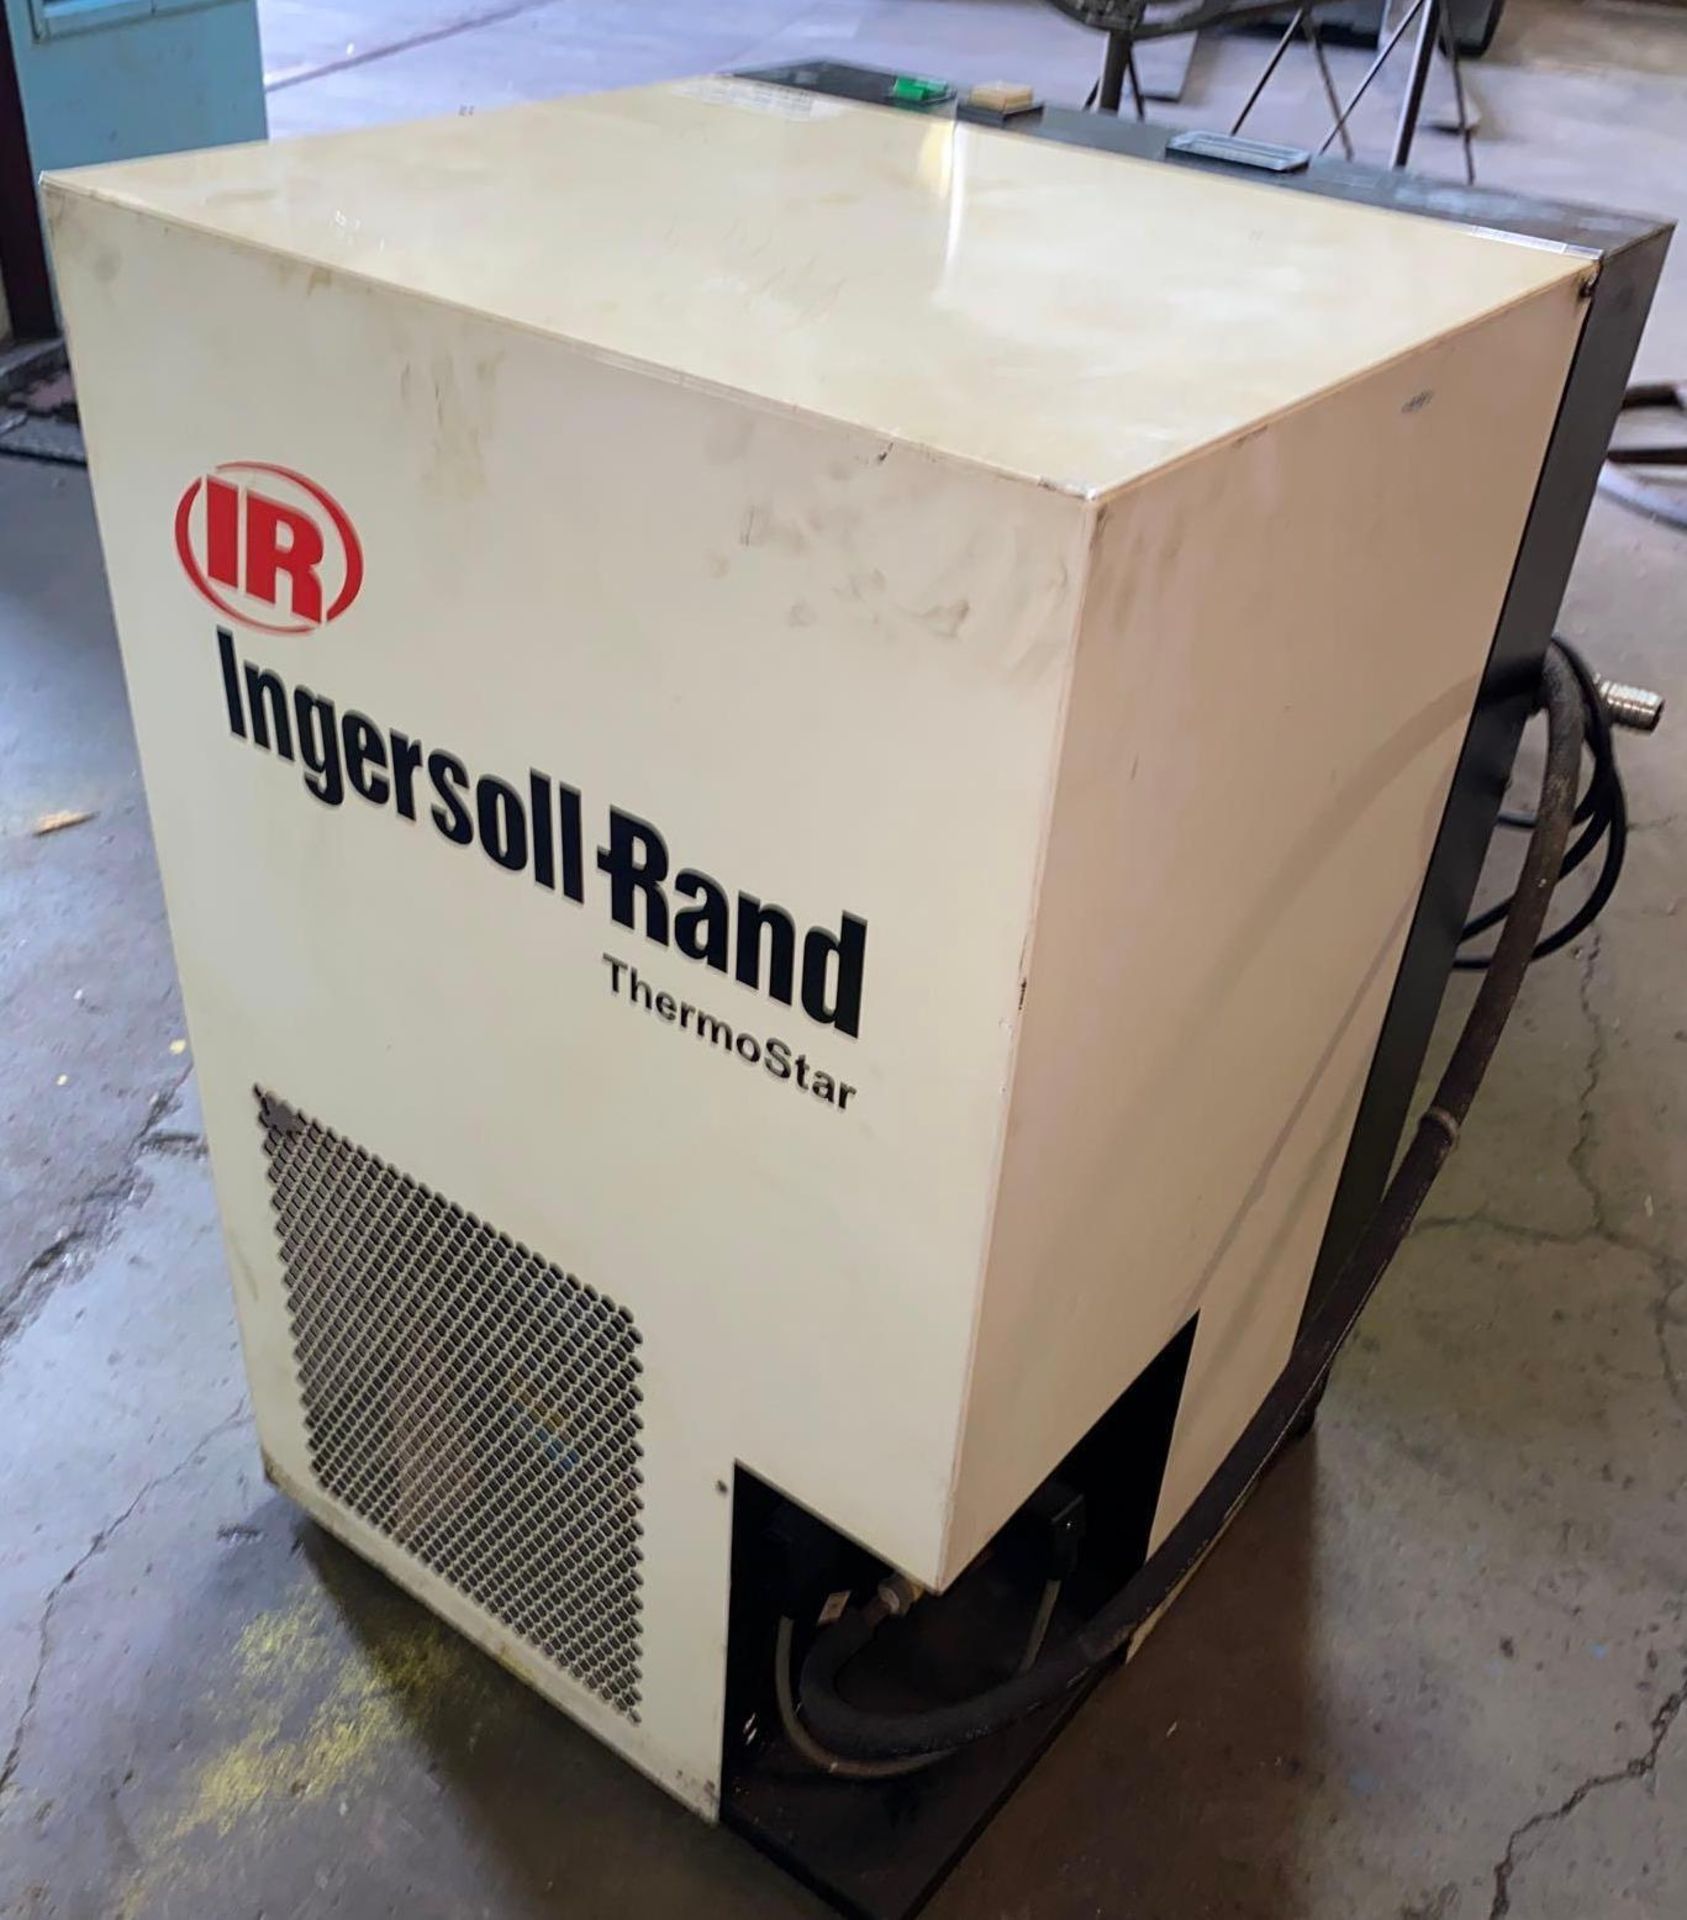 Ingersoll Rand TS50 Refrigerated Air Dryer - Image 2 of 4